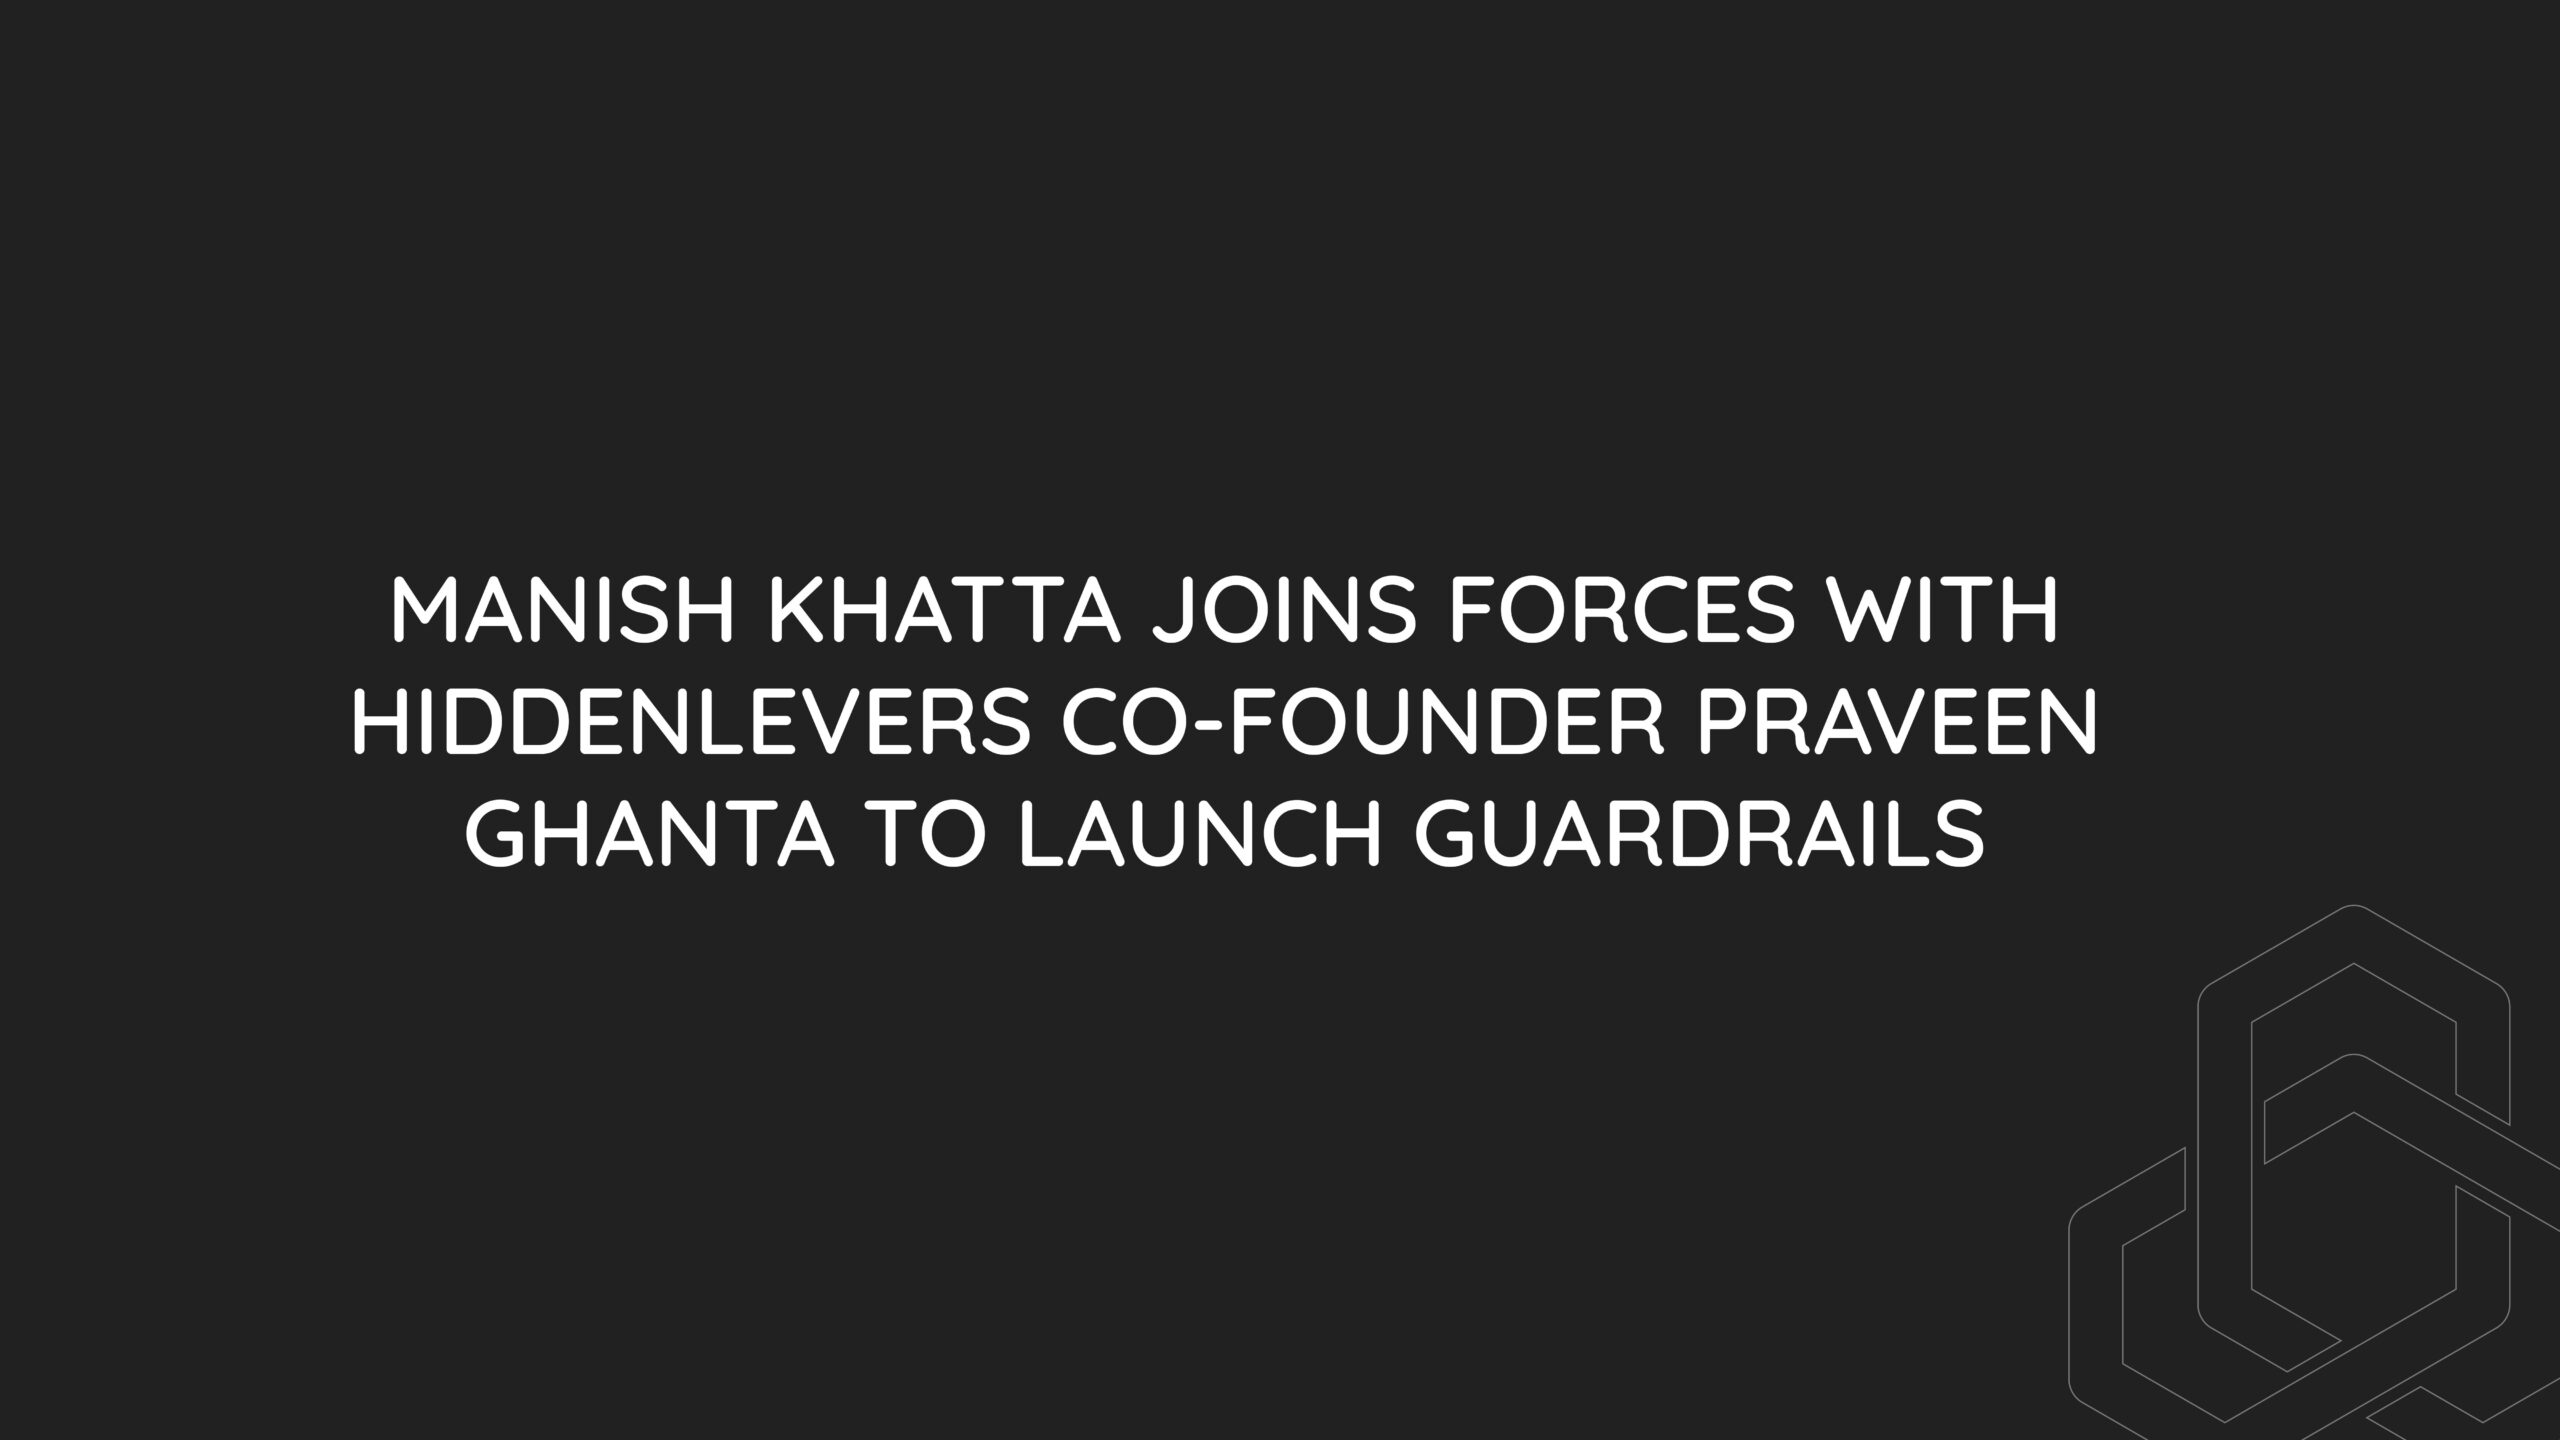 Manish Khatta joins forces with HiddenLevers co-founder Praveen Ghanta to launch Guardrails